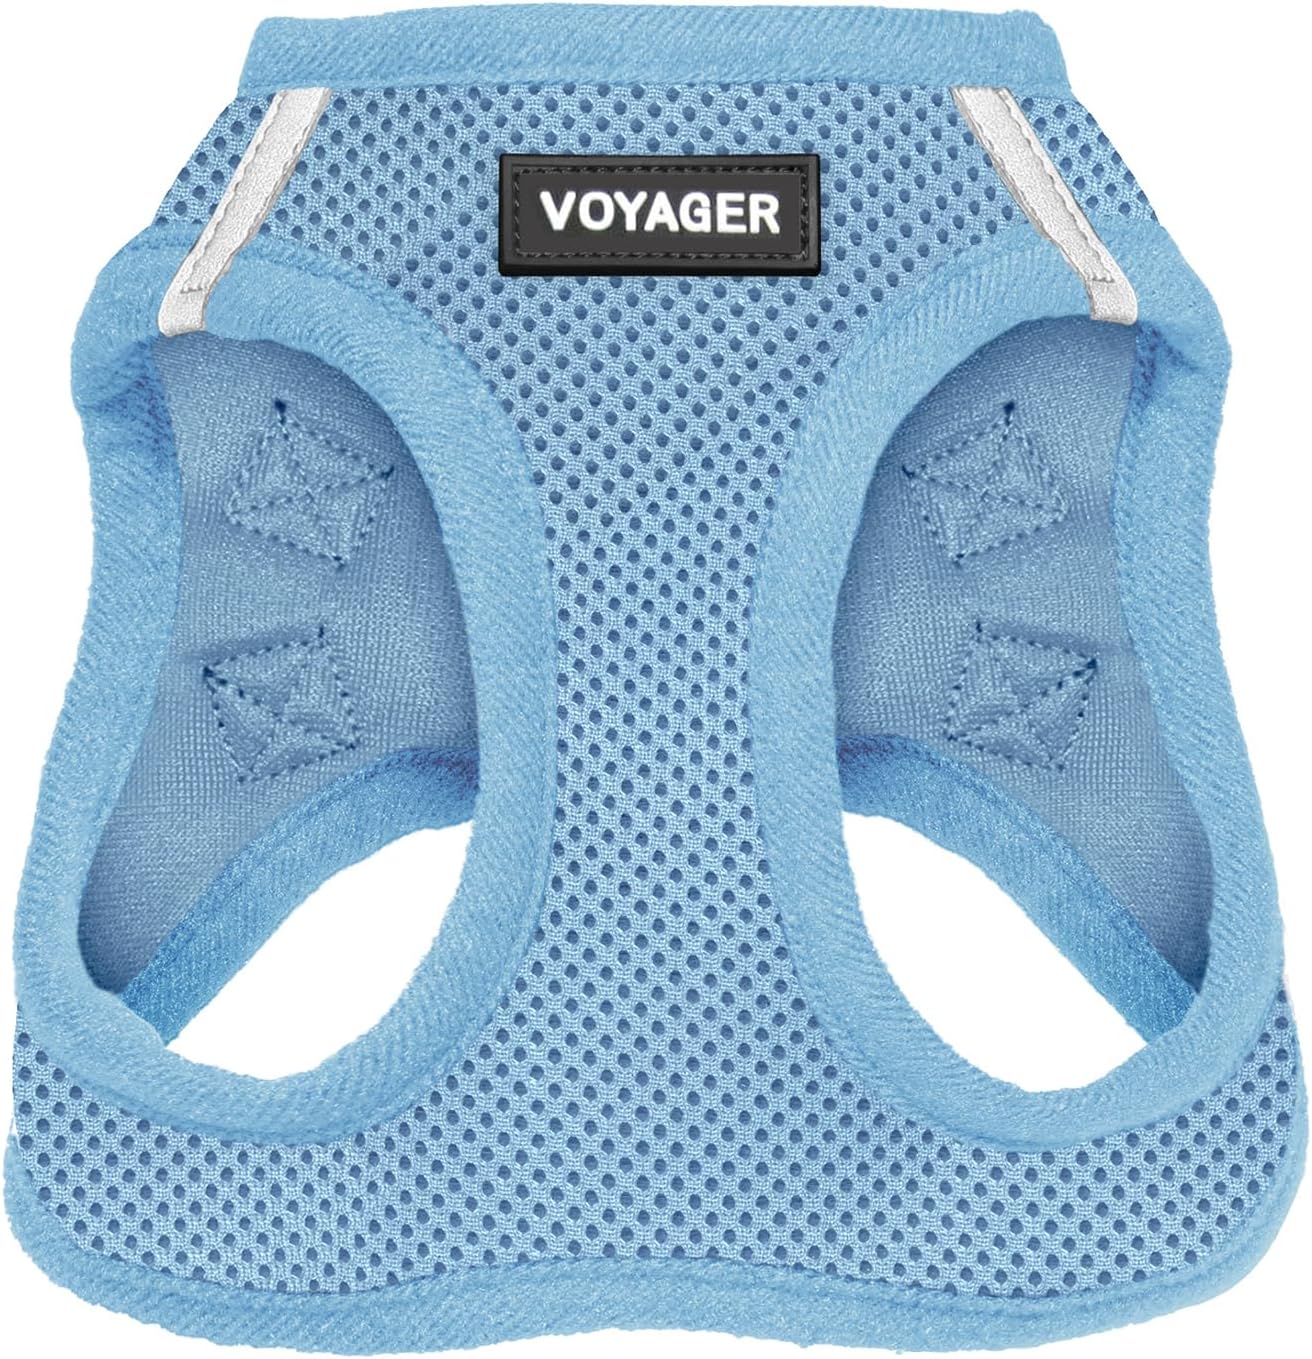 Voyager Step-in Air Dog Harness